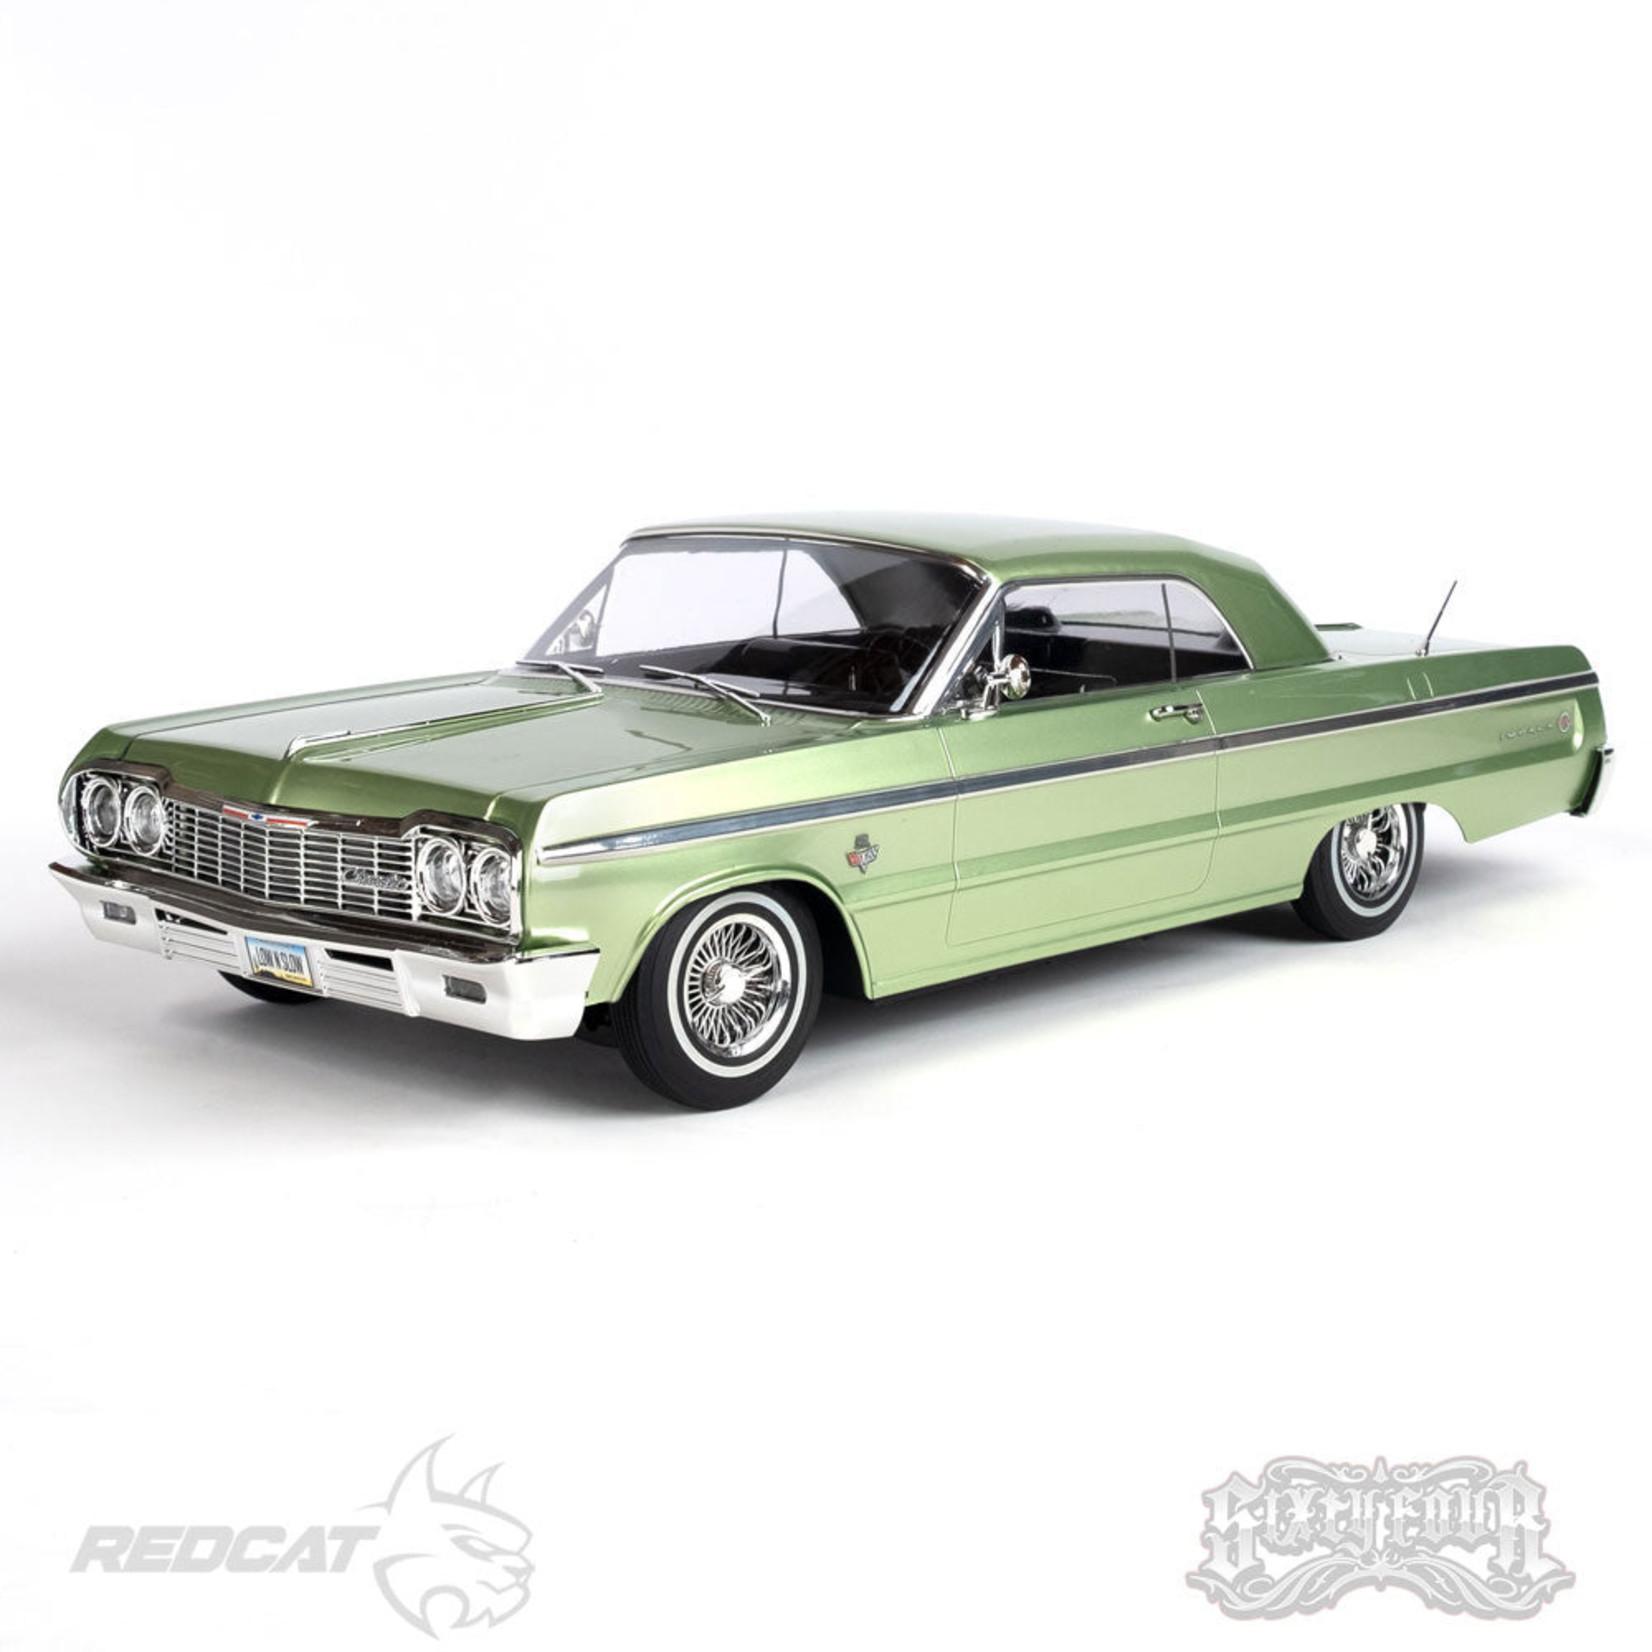 Rc 64 Impala:  Features and Differences of the RC 64 Impala